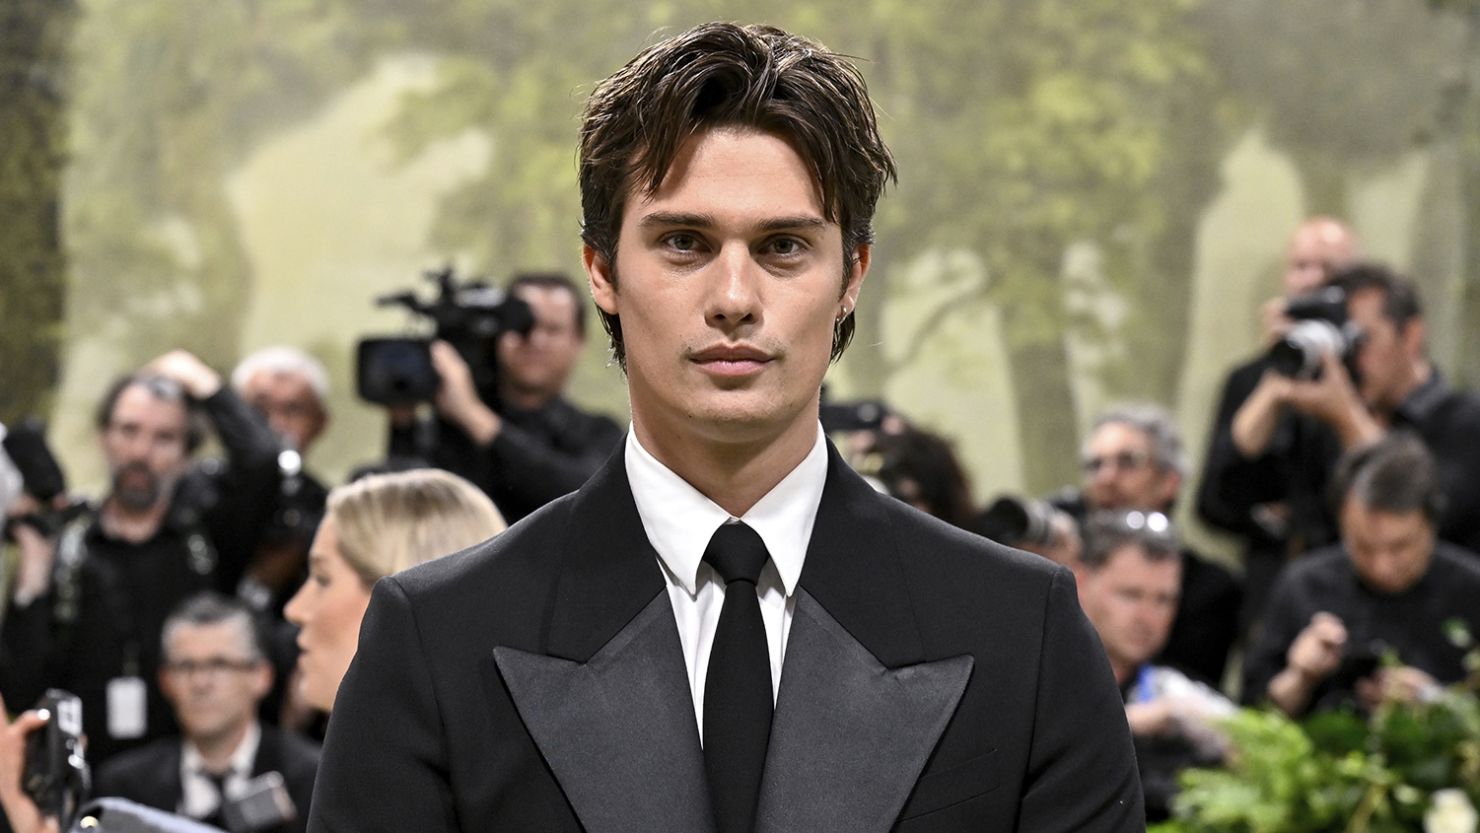 Nicholas Galitzine fears his good looks will be his "defining feature"